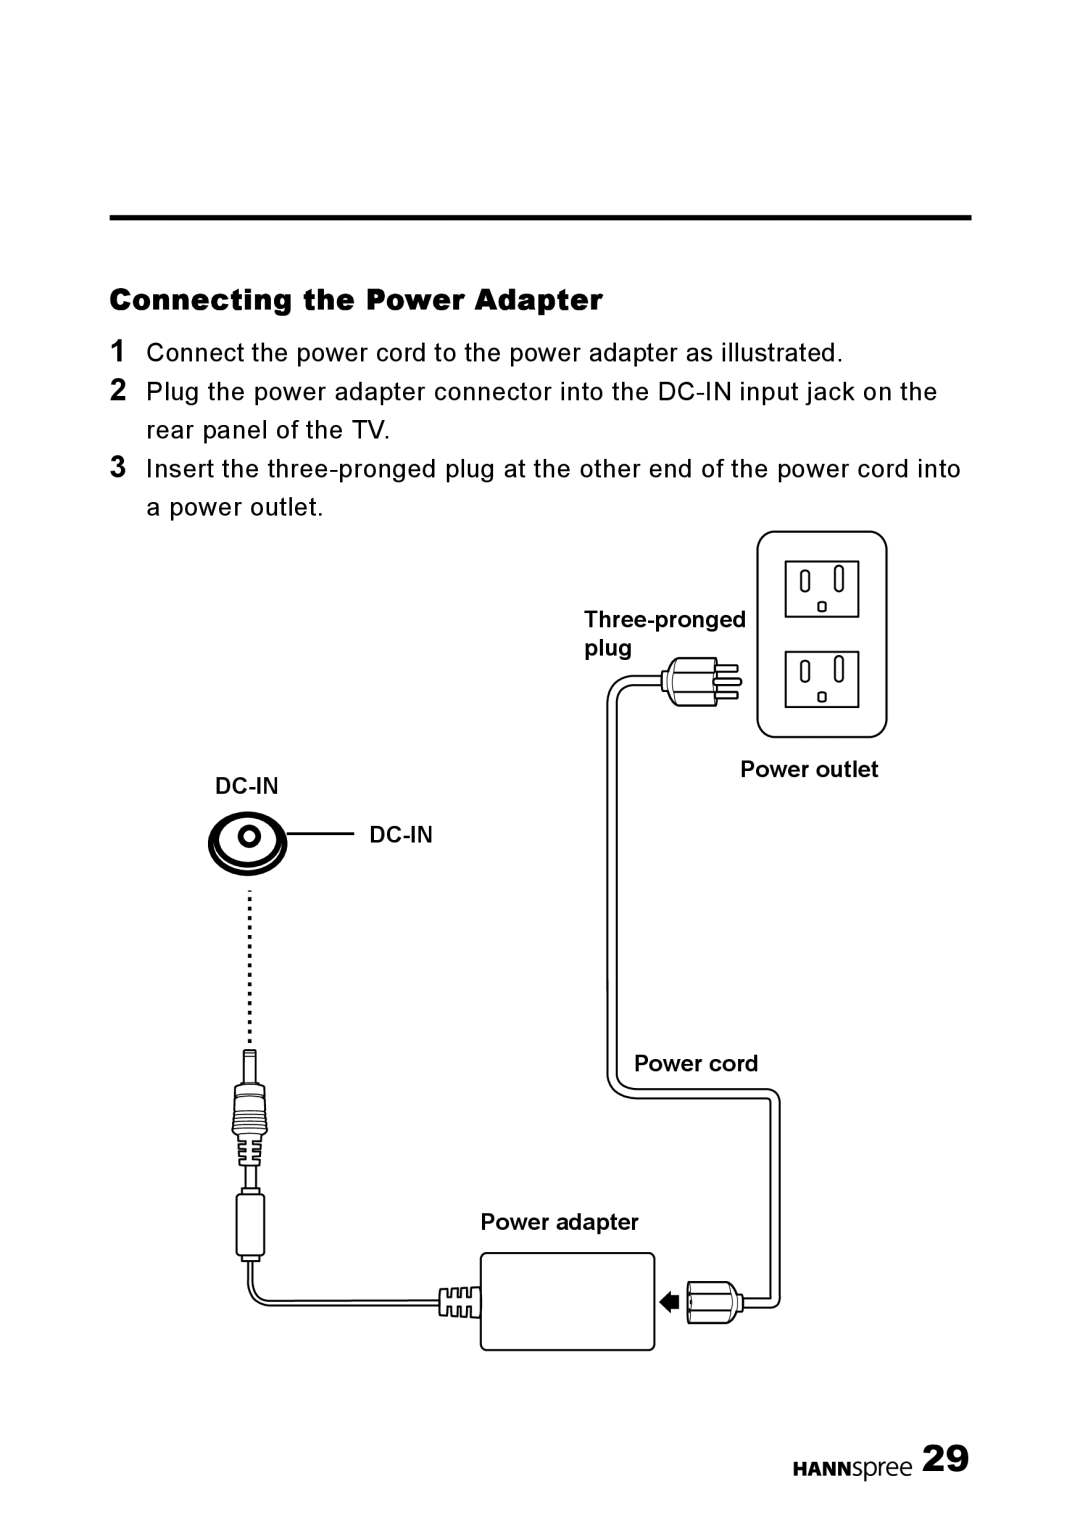 HANNspree HANNSz.crab user manual Connecting the Power Adapter, DC-IN input jack 